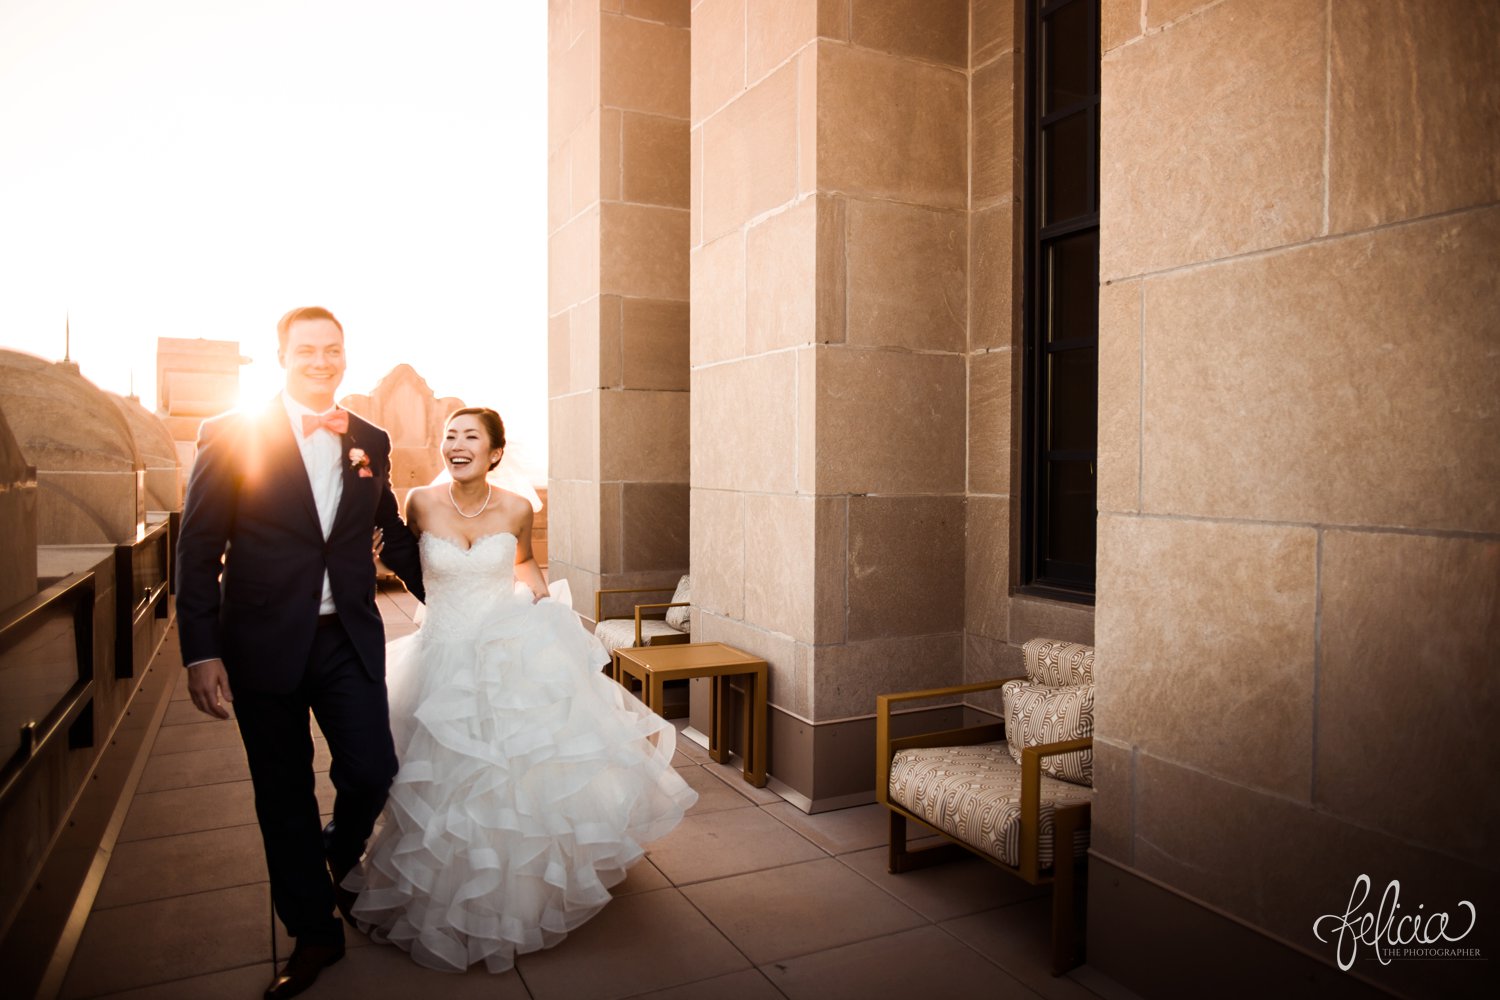 images by feliciathephotographer.com | destination wedding photographer | the grand hall at power and light | kansas city | missouri | downtown | glamorous | multicultural | rooftop | golden hour | sunset | pearls | romantic | couple portrait | city view | laughter | joy | 